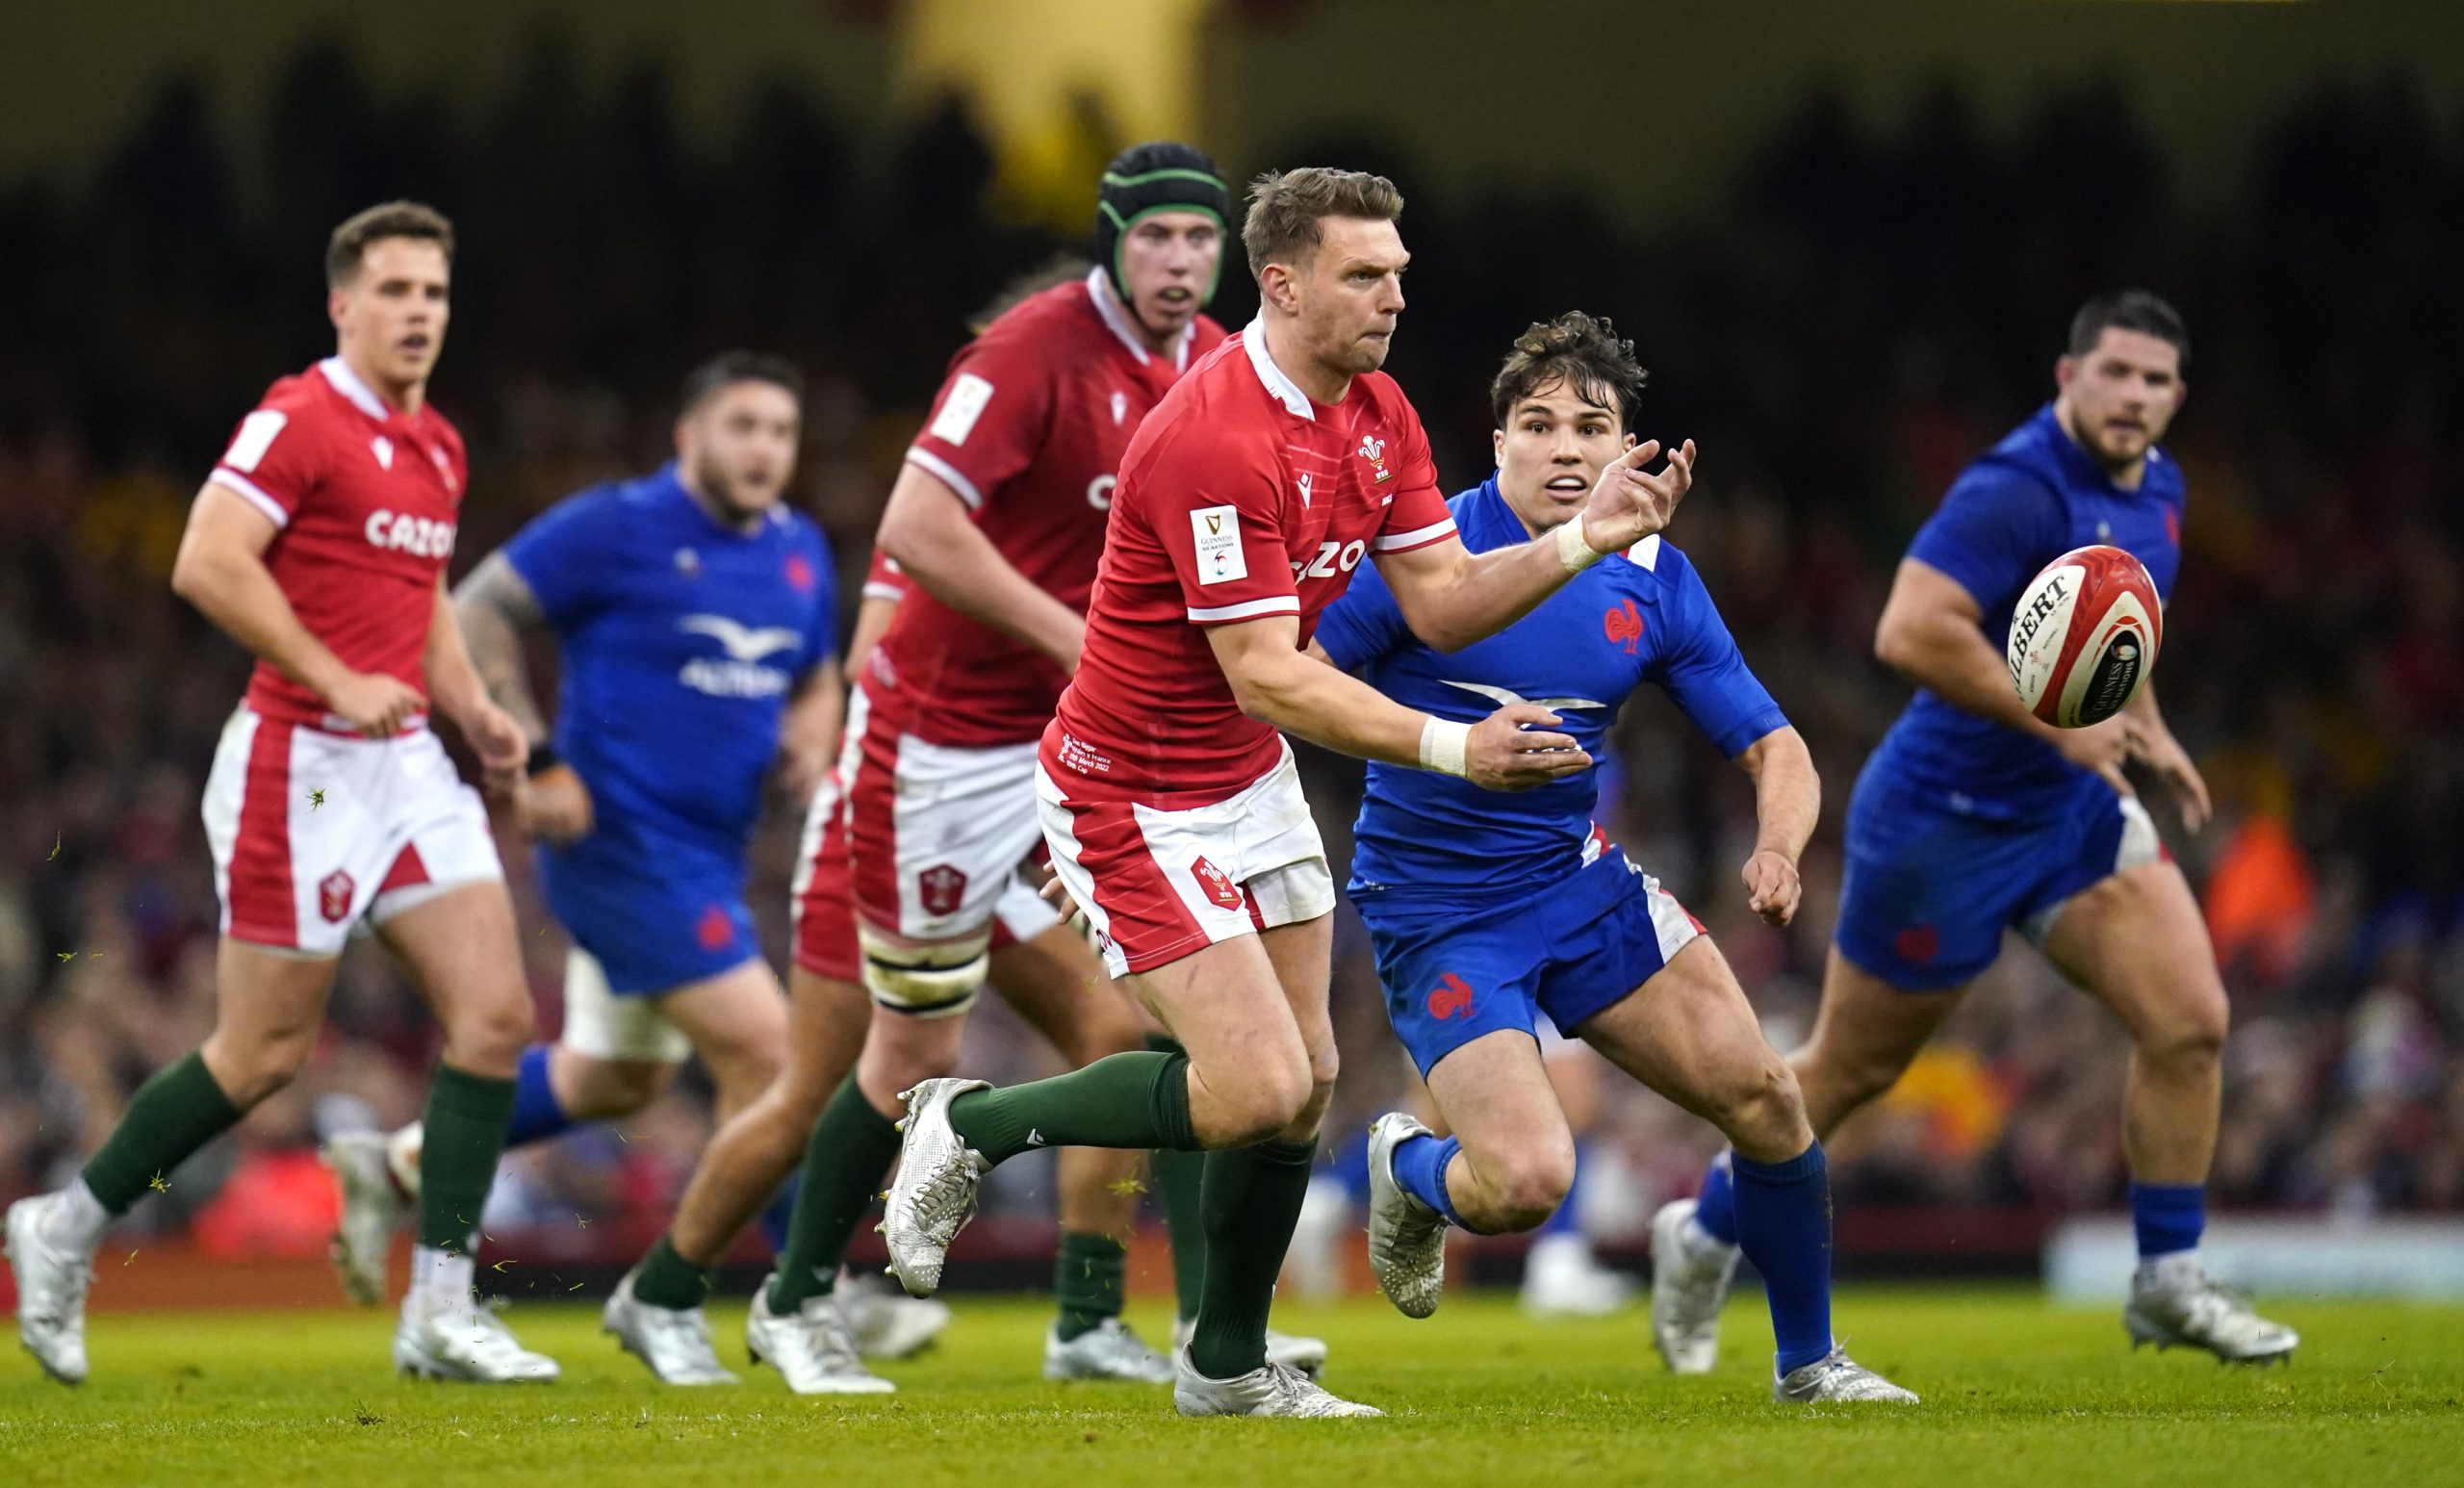 5 key talking points ahead of a challenging French test for Wales